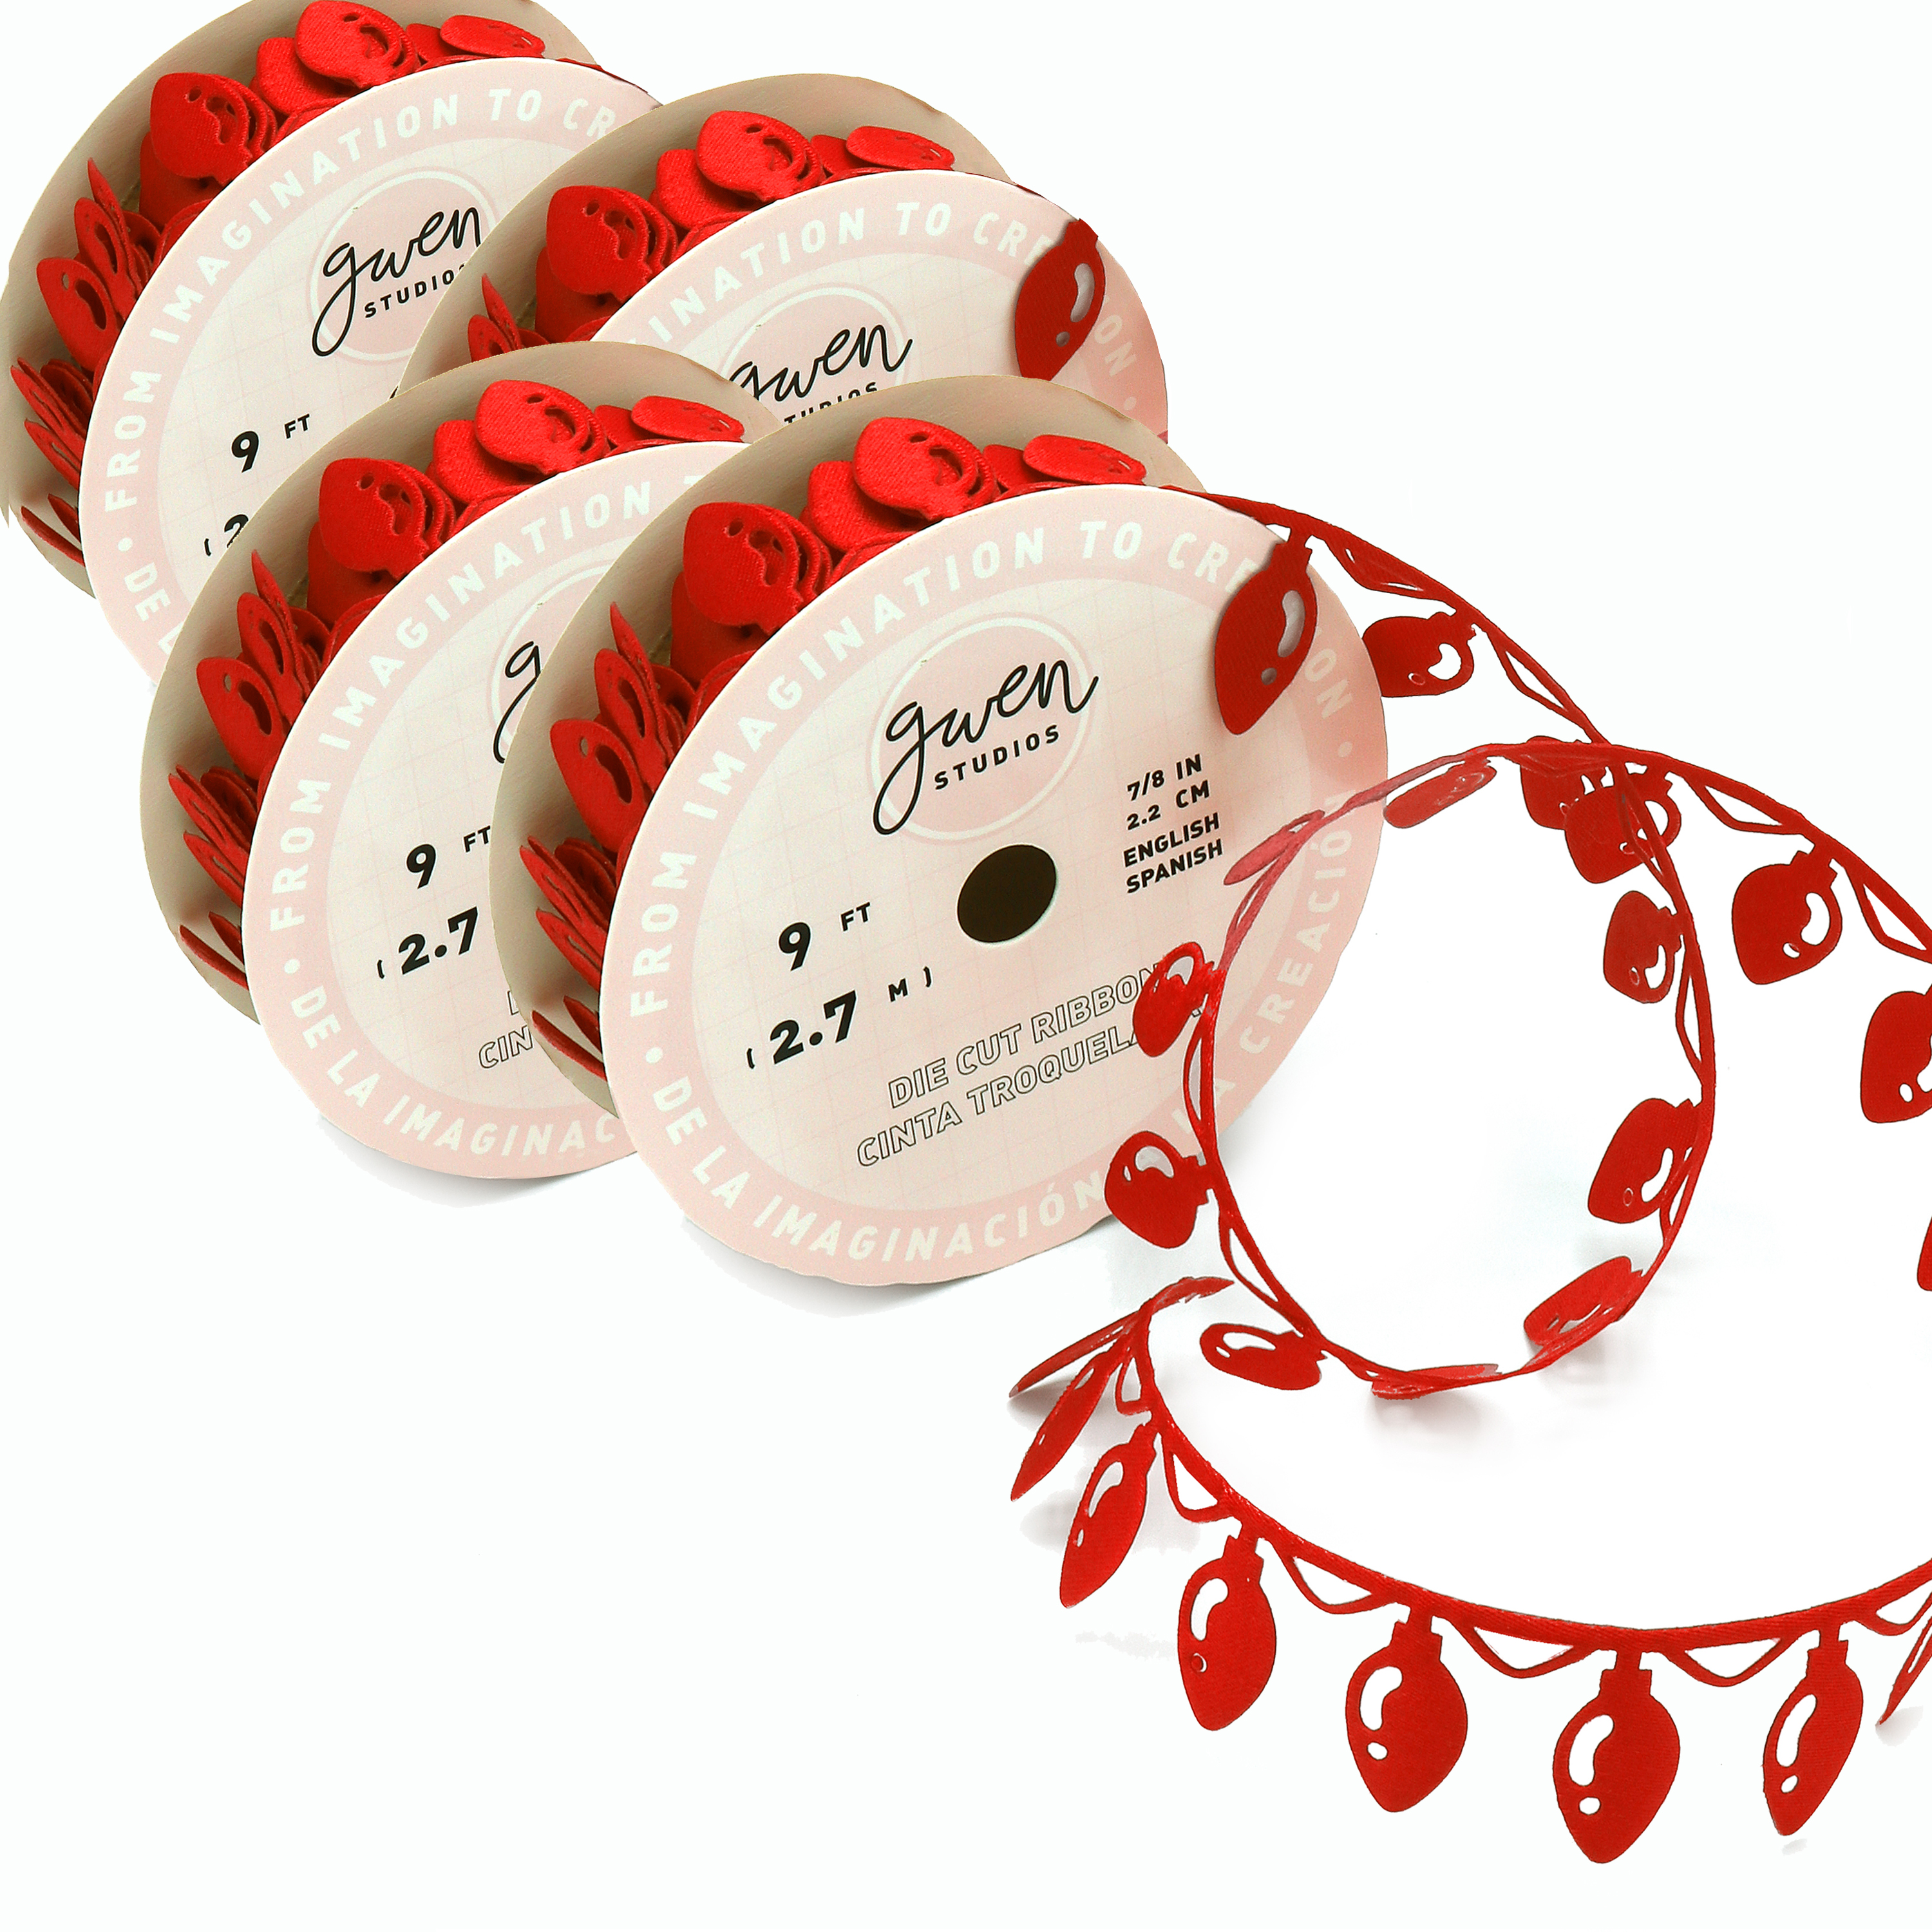 Die Cut Red Christmas Ribbon, Holiday Lights, 7/8" x 12 Yards by Gwen Studios - image 1 of 4